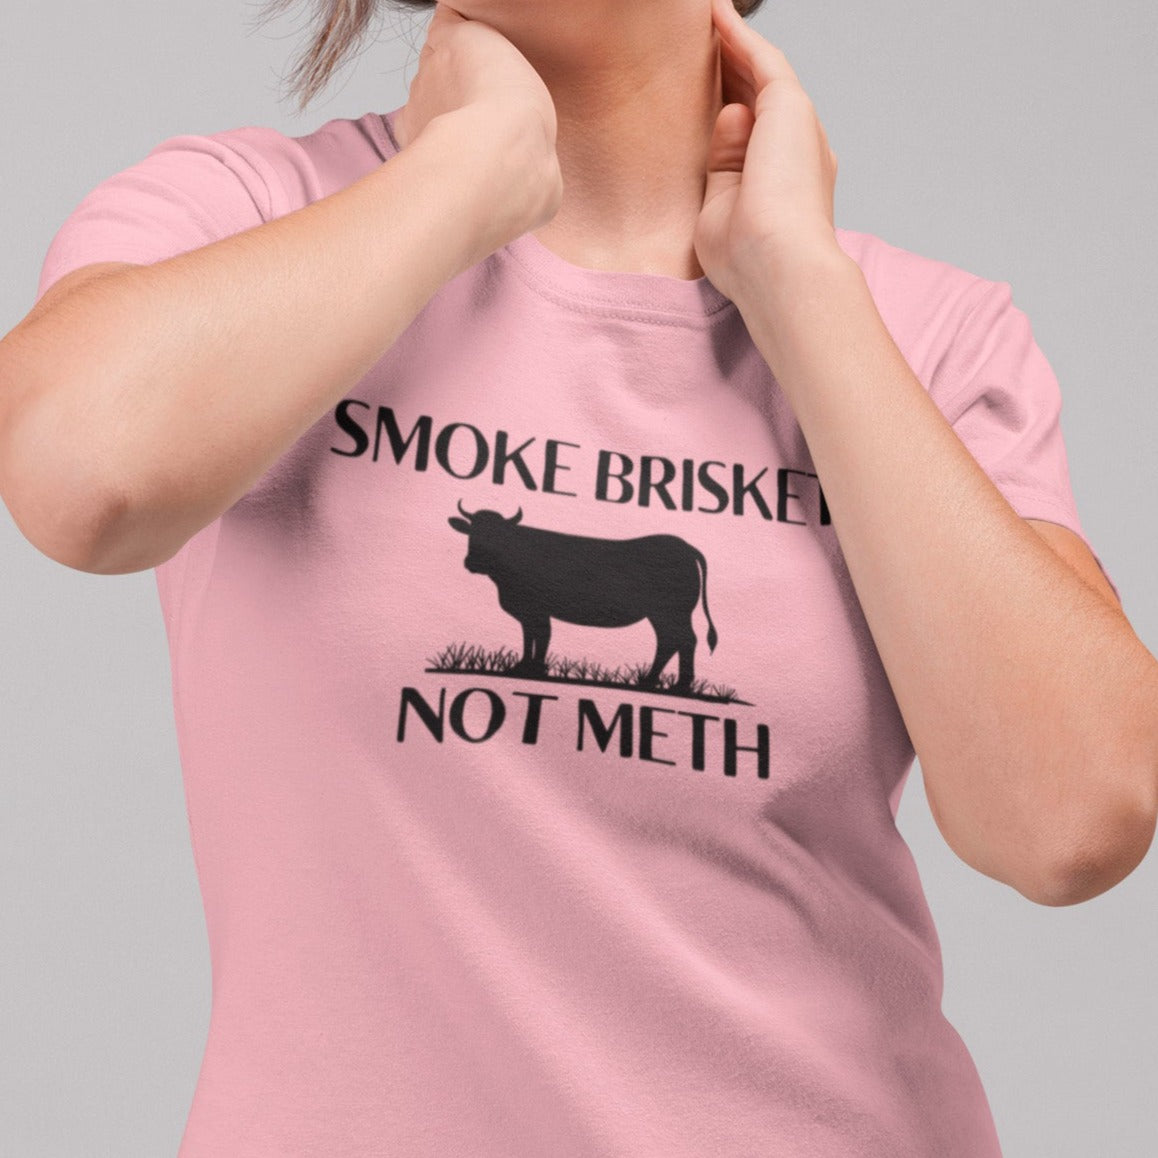 smoke-brisket-not-meth-pink-t-shirt-funny-cow-mockup-featuring-a-woman-wearing-a-round-neck-tshirt-while-at-a-studio